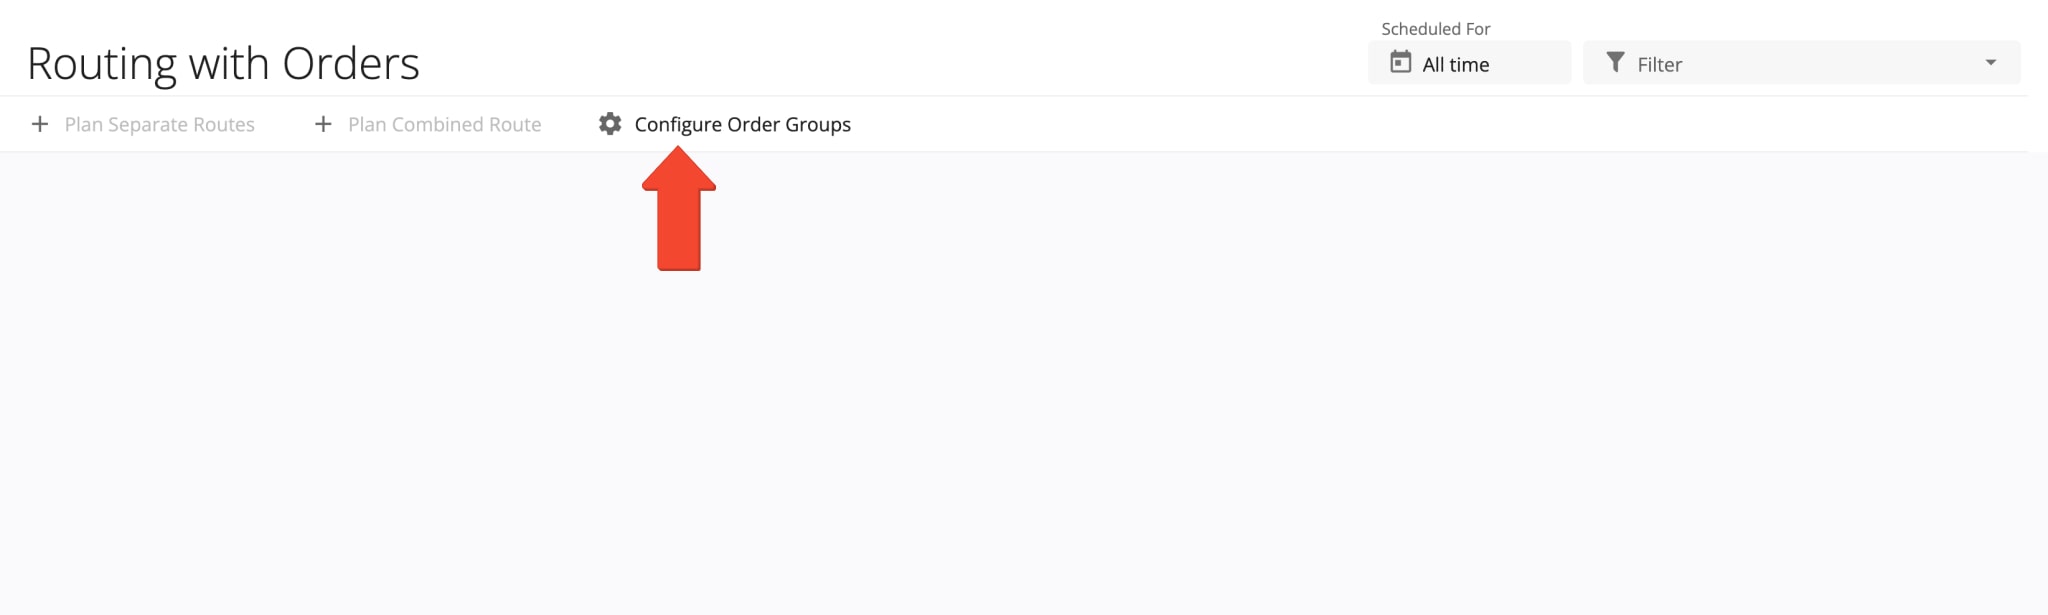 Configure Order Groups to group orders by ZIP Code, Custom Data values, and unique Group IDs and plan routes with custom Order Groups.